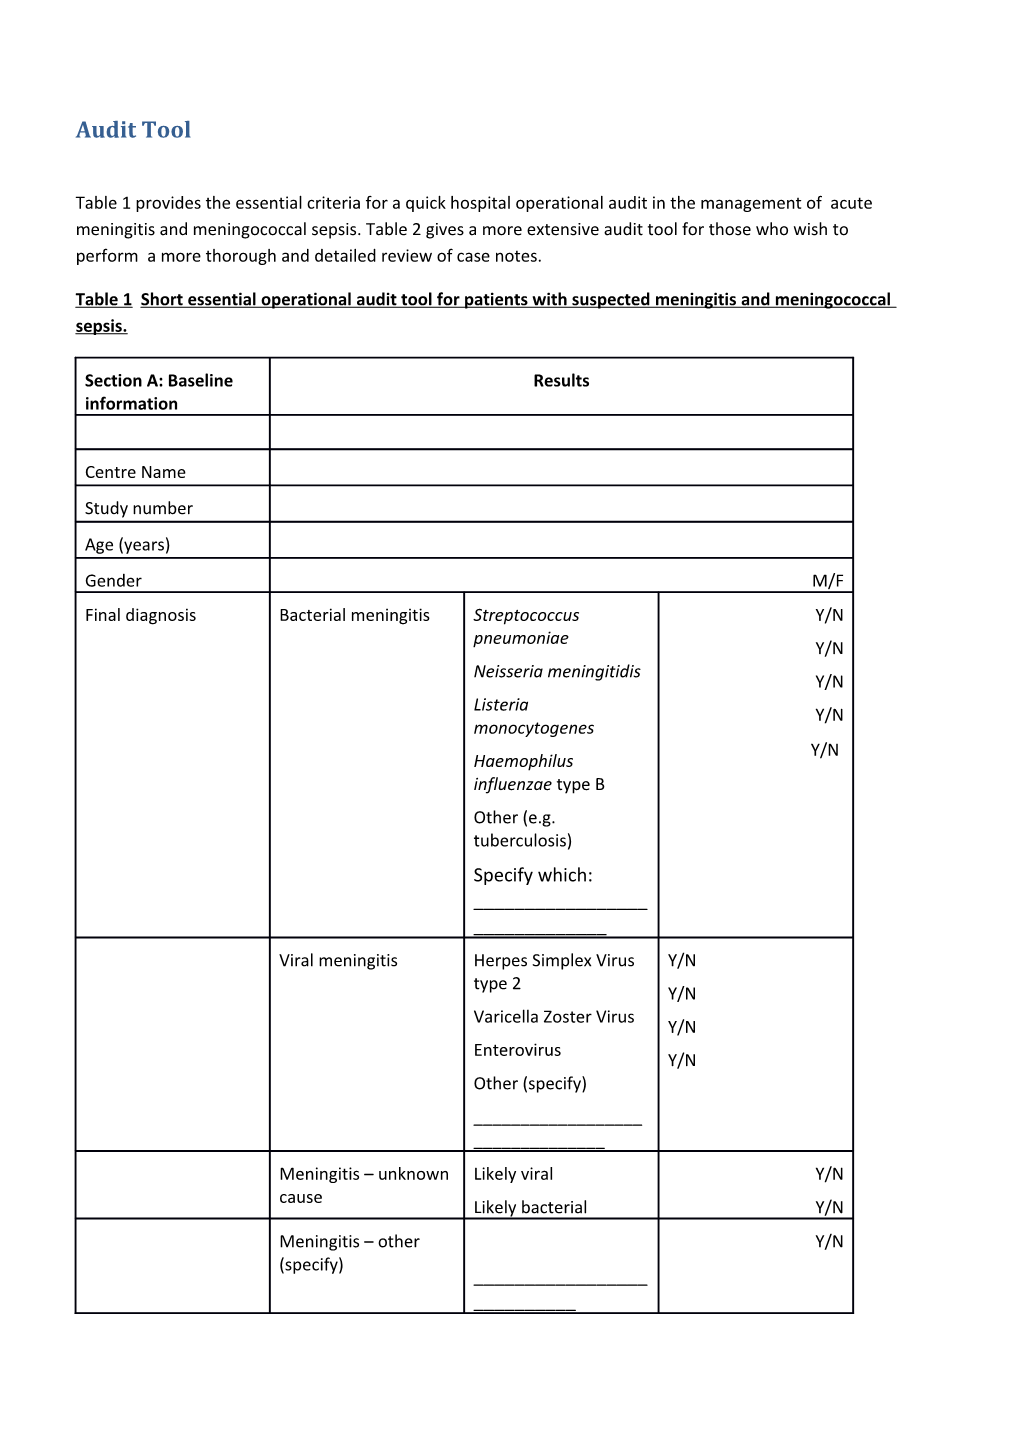 Table 1 Shortessential Operational Audit Tool for Patients with Suspected Meningitis And